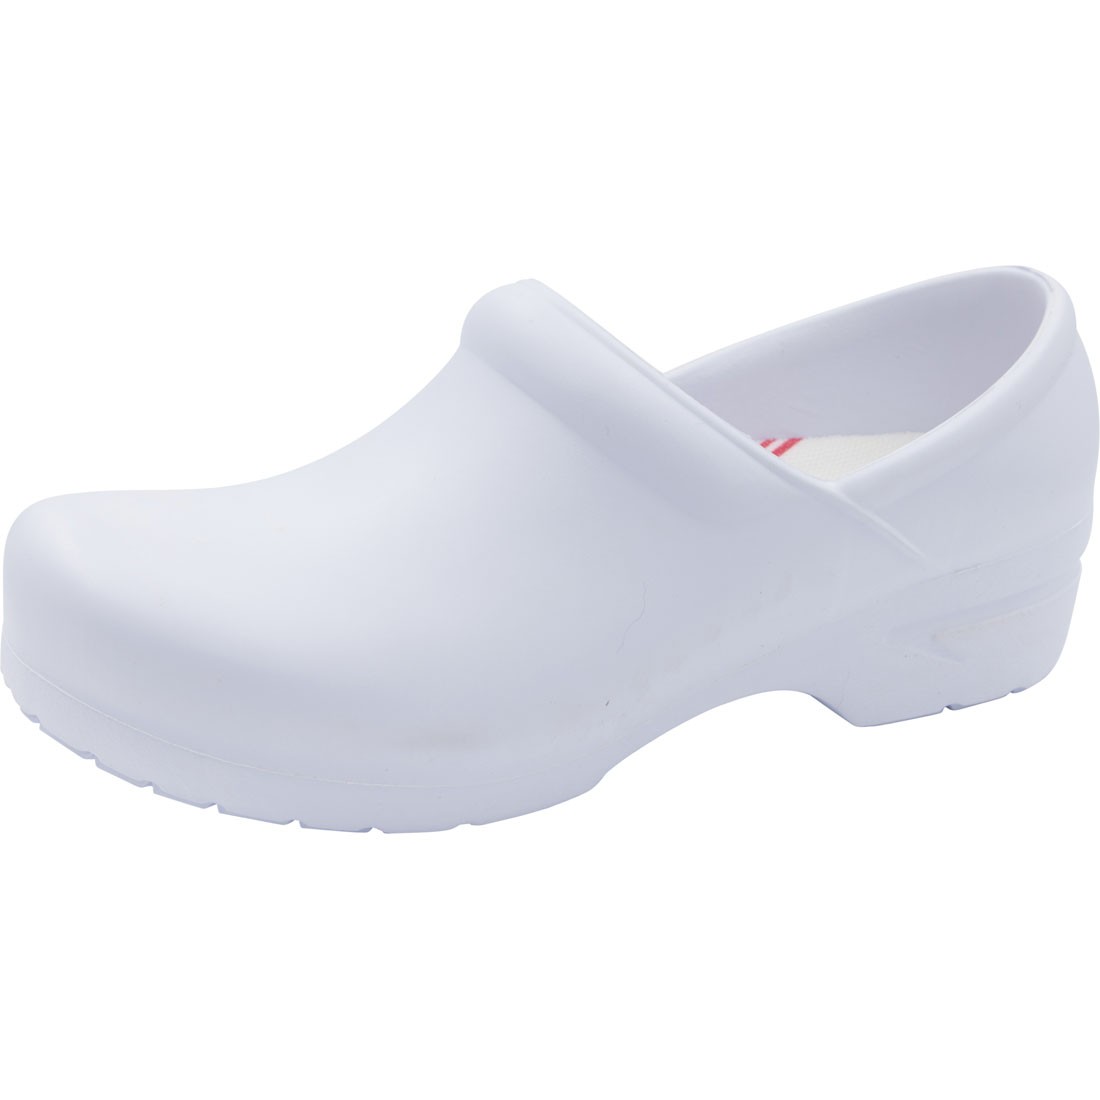 Picture of Anywear Guardianangel Wht 11 Guardianangel protective Plastic Stepin, White - Size 11